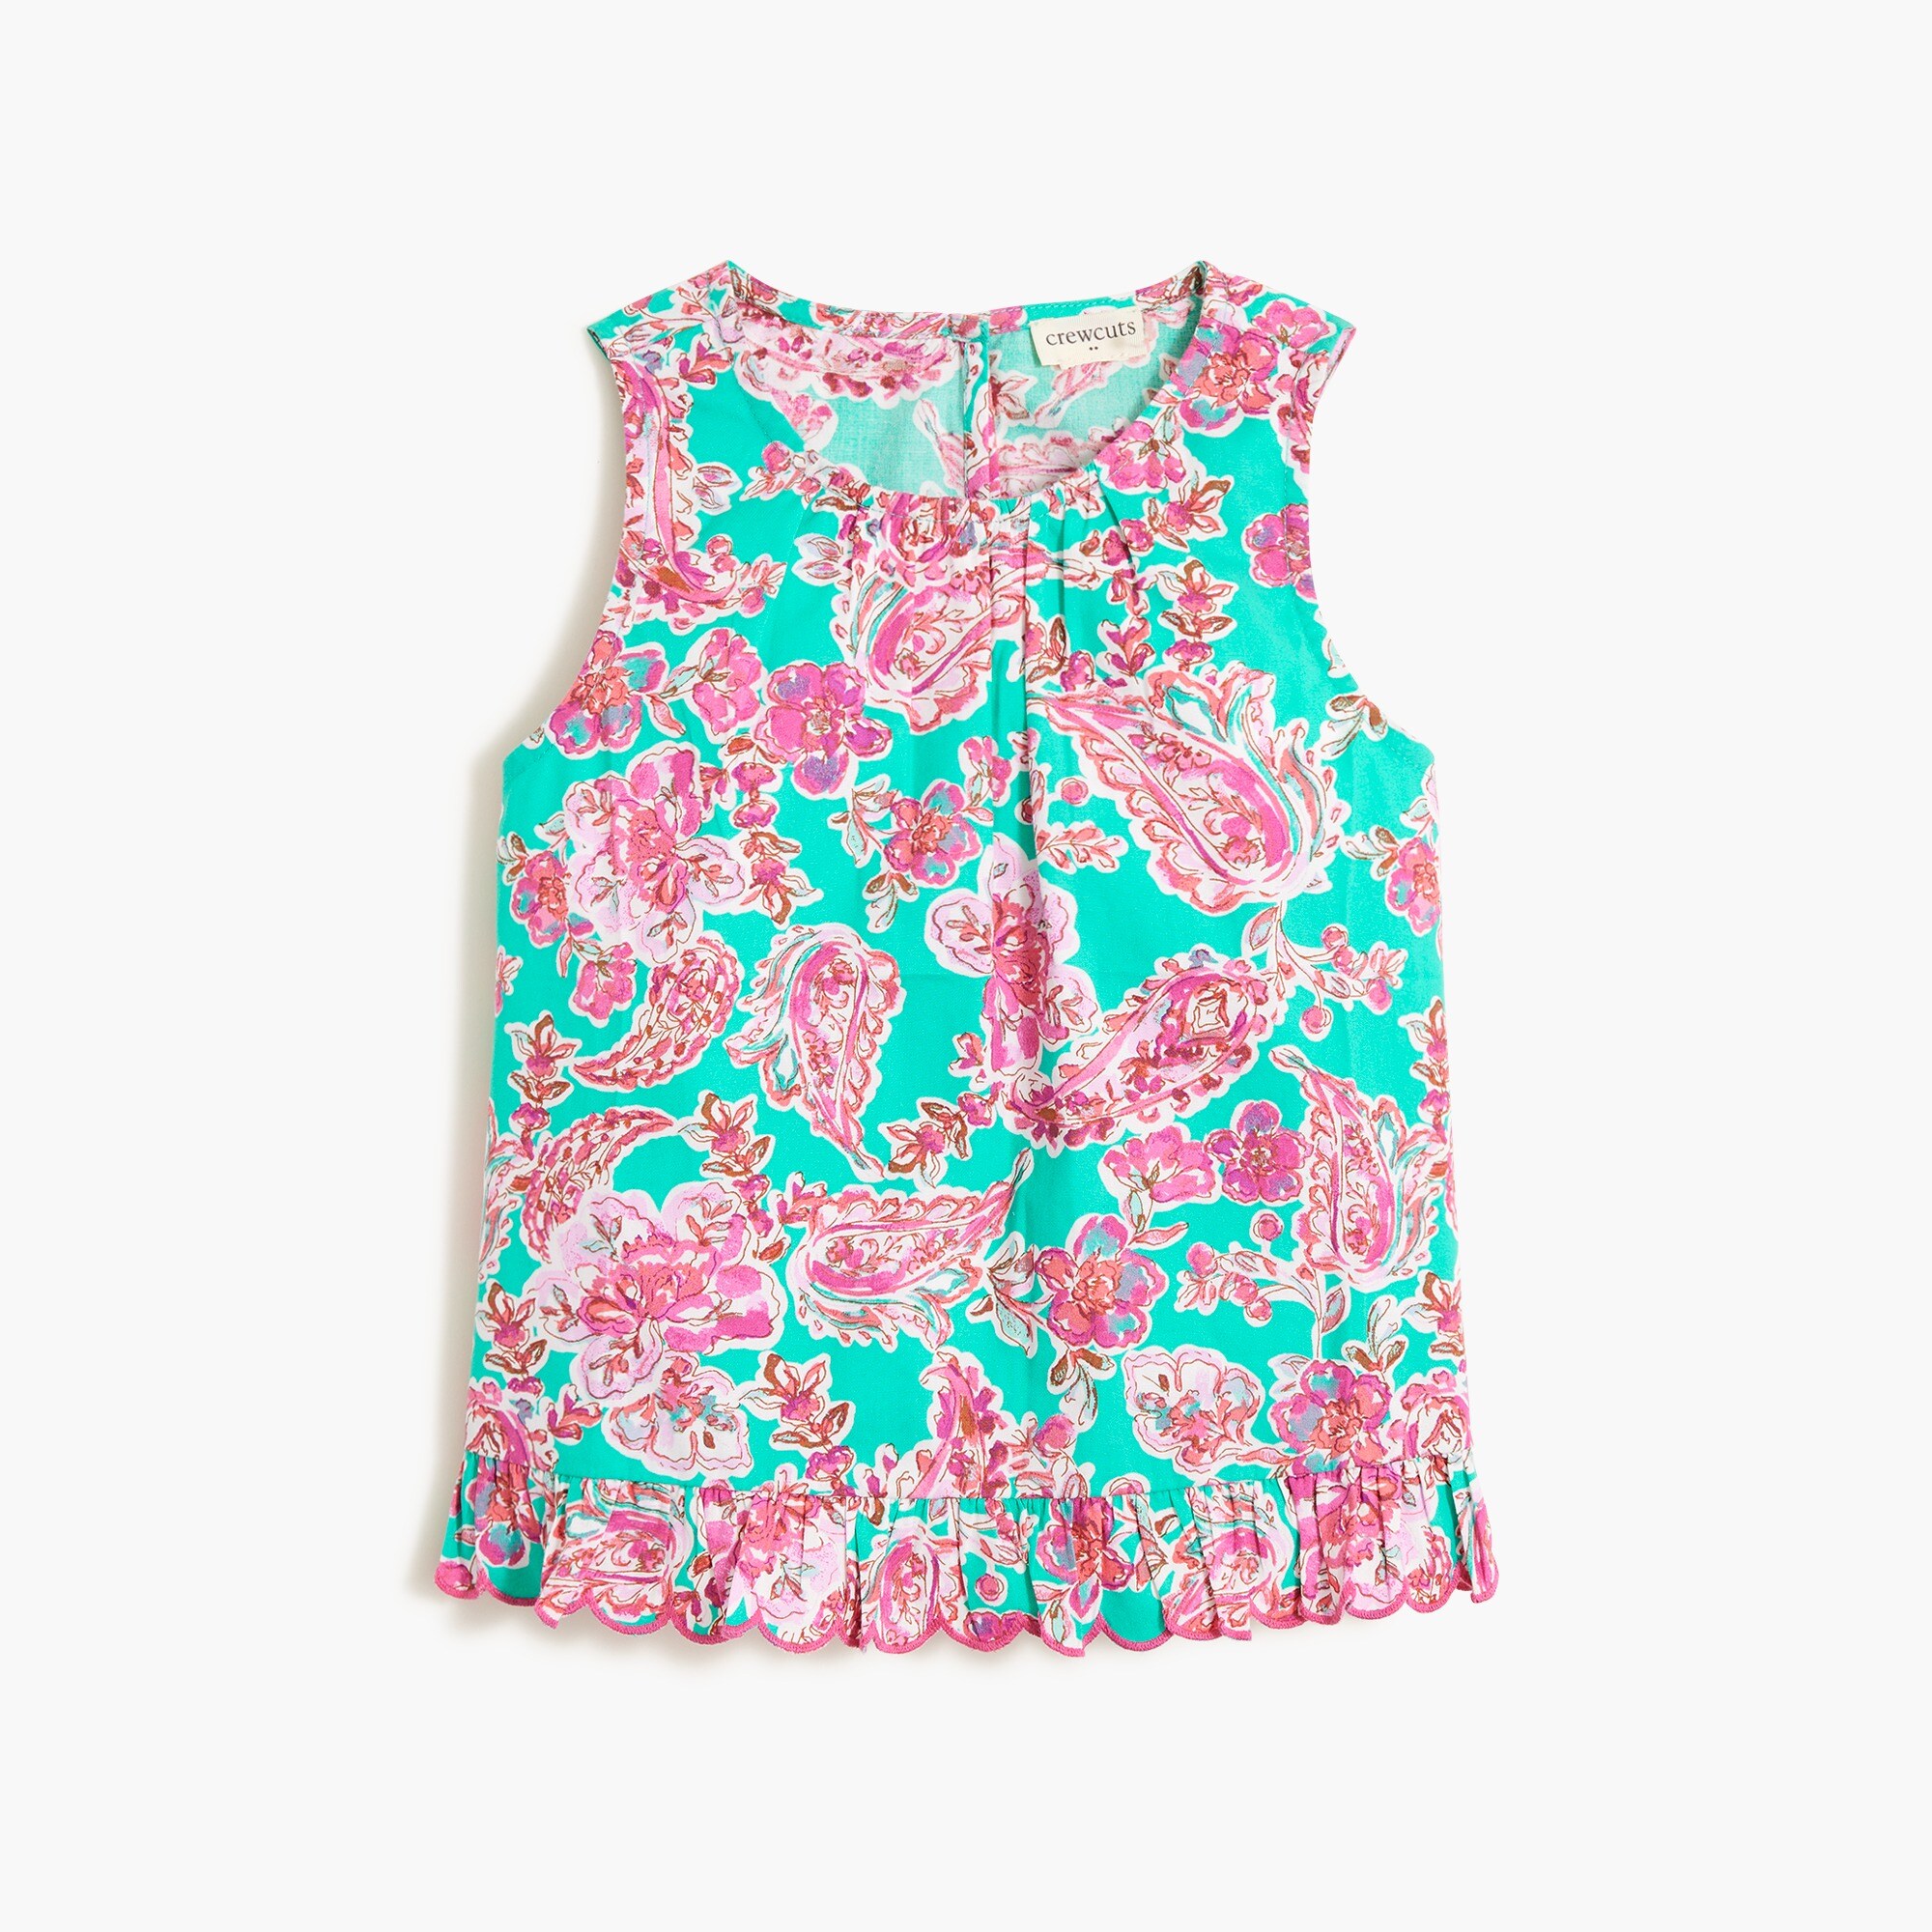  Girls' top with scalloped hem